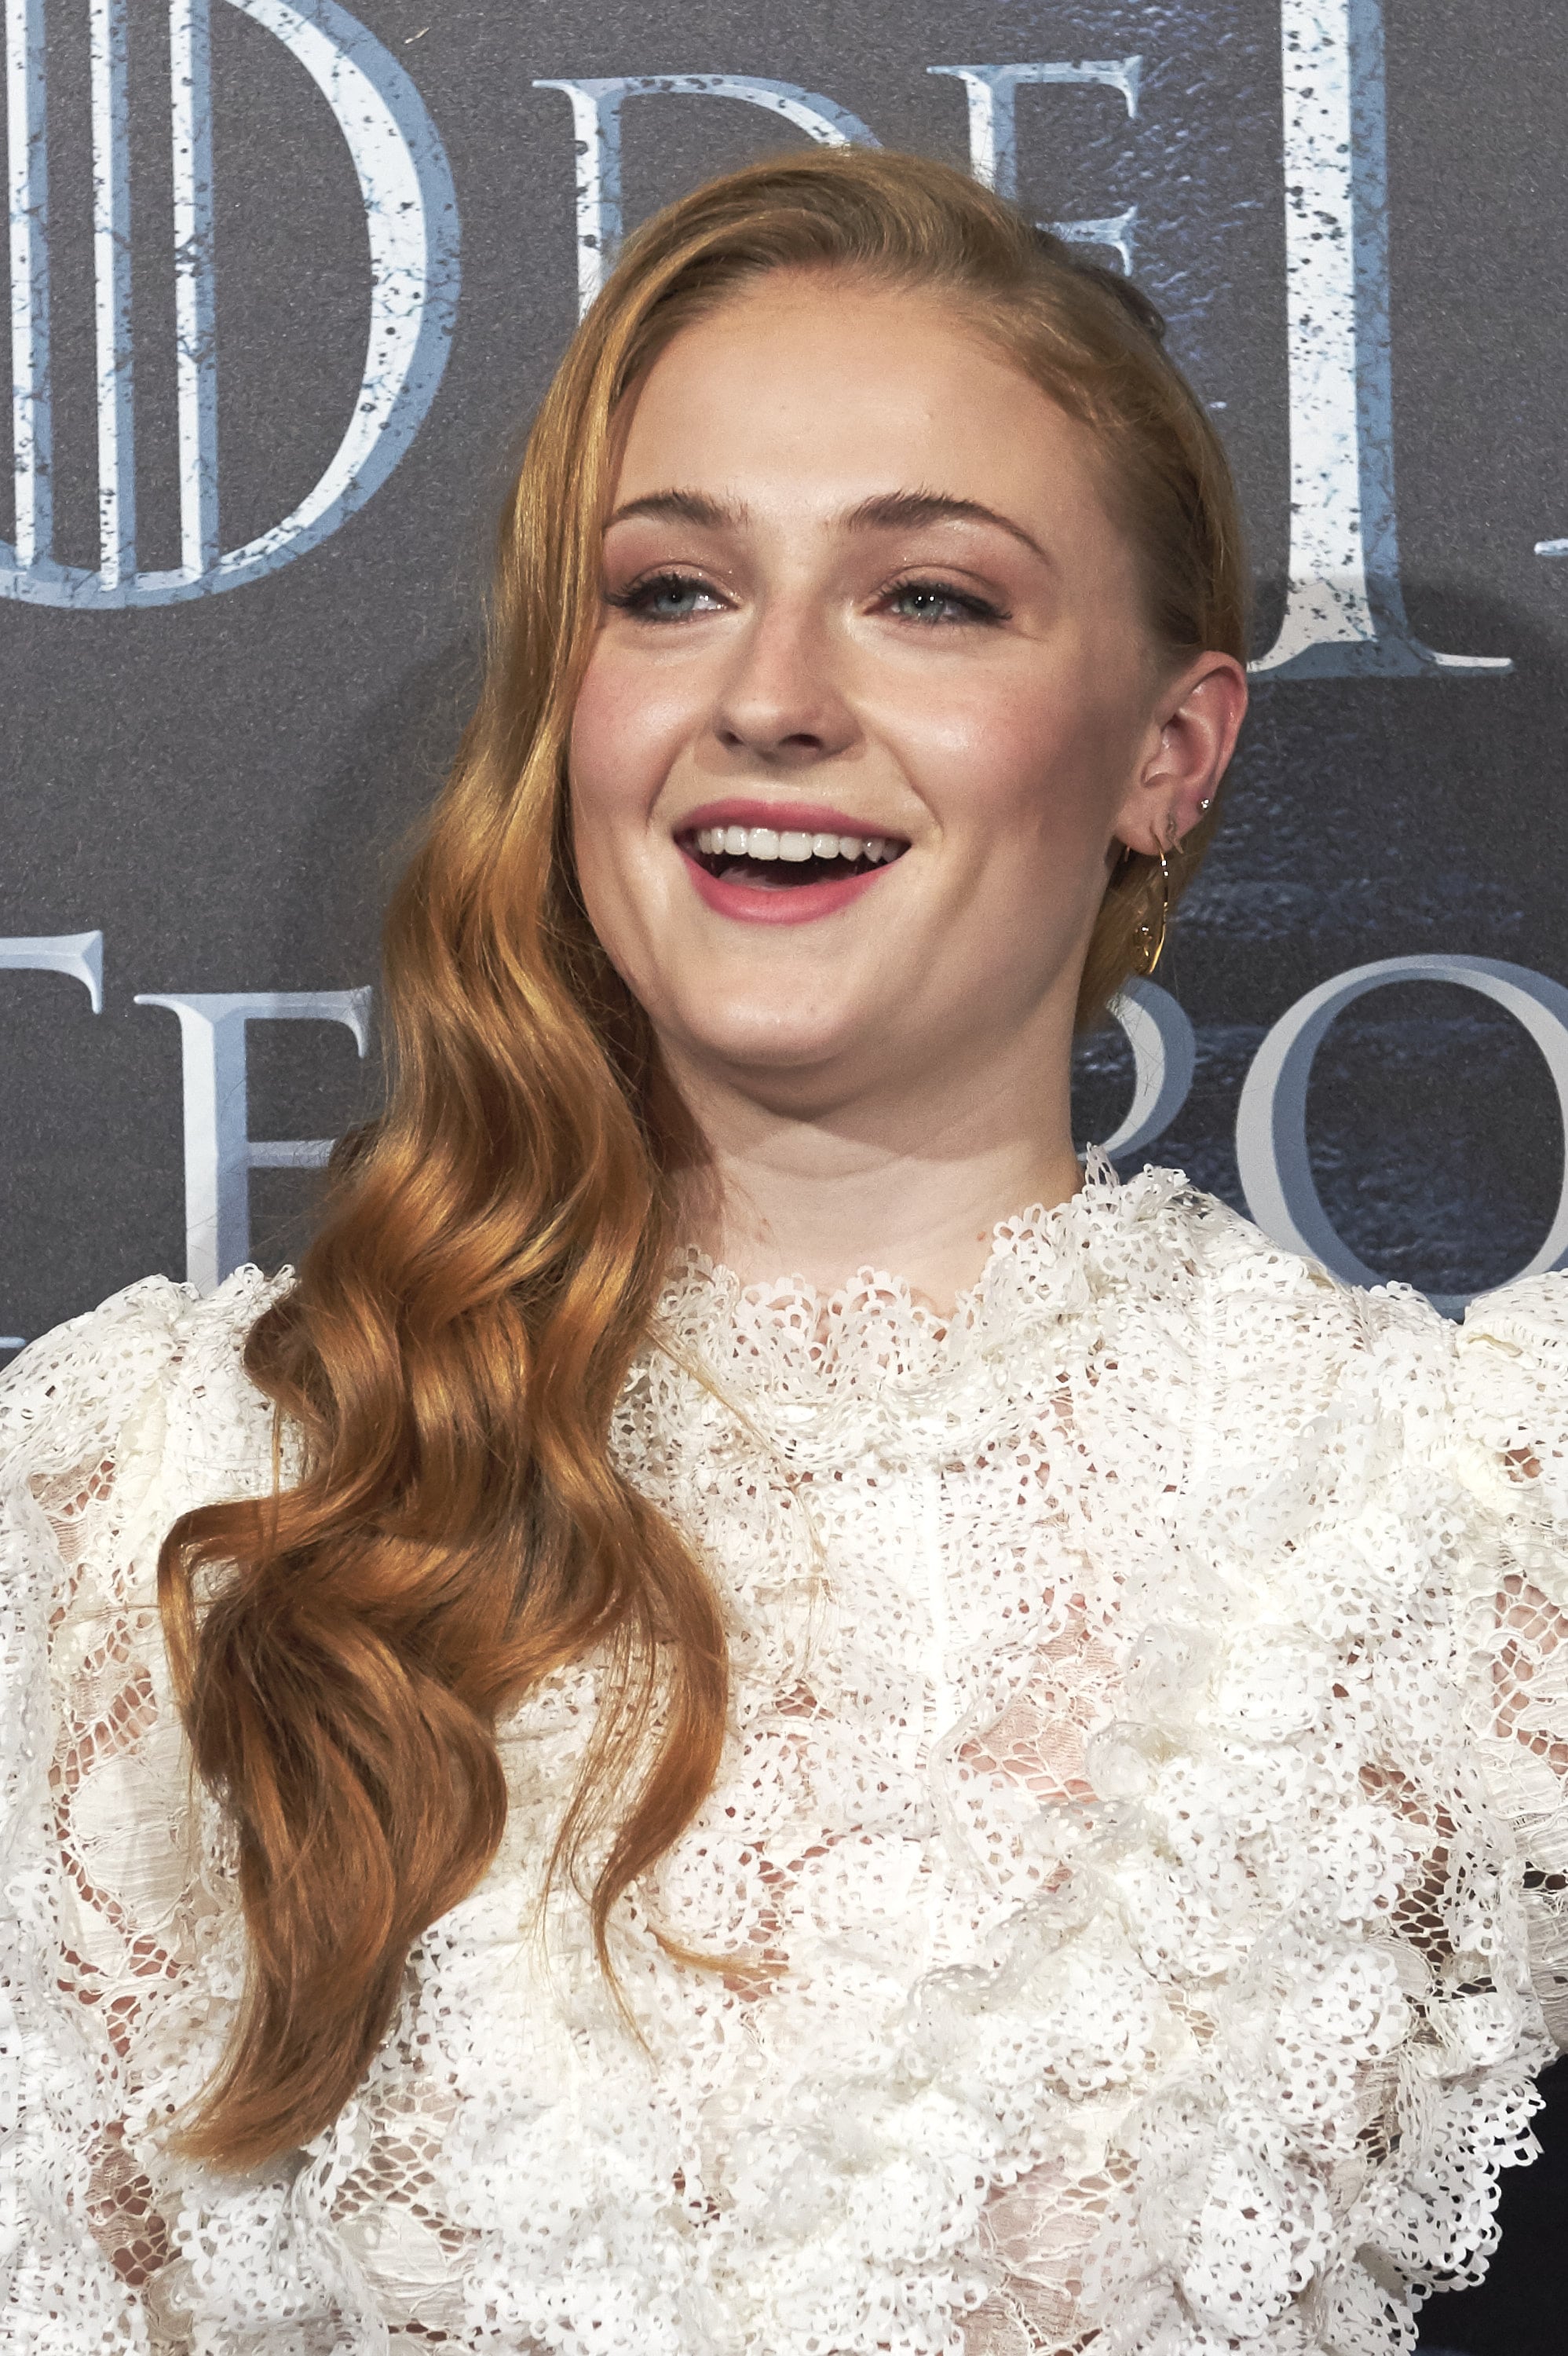 Sophie Turner has traded her signature red hair for blonde